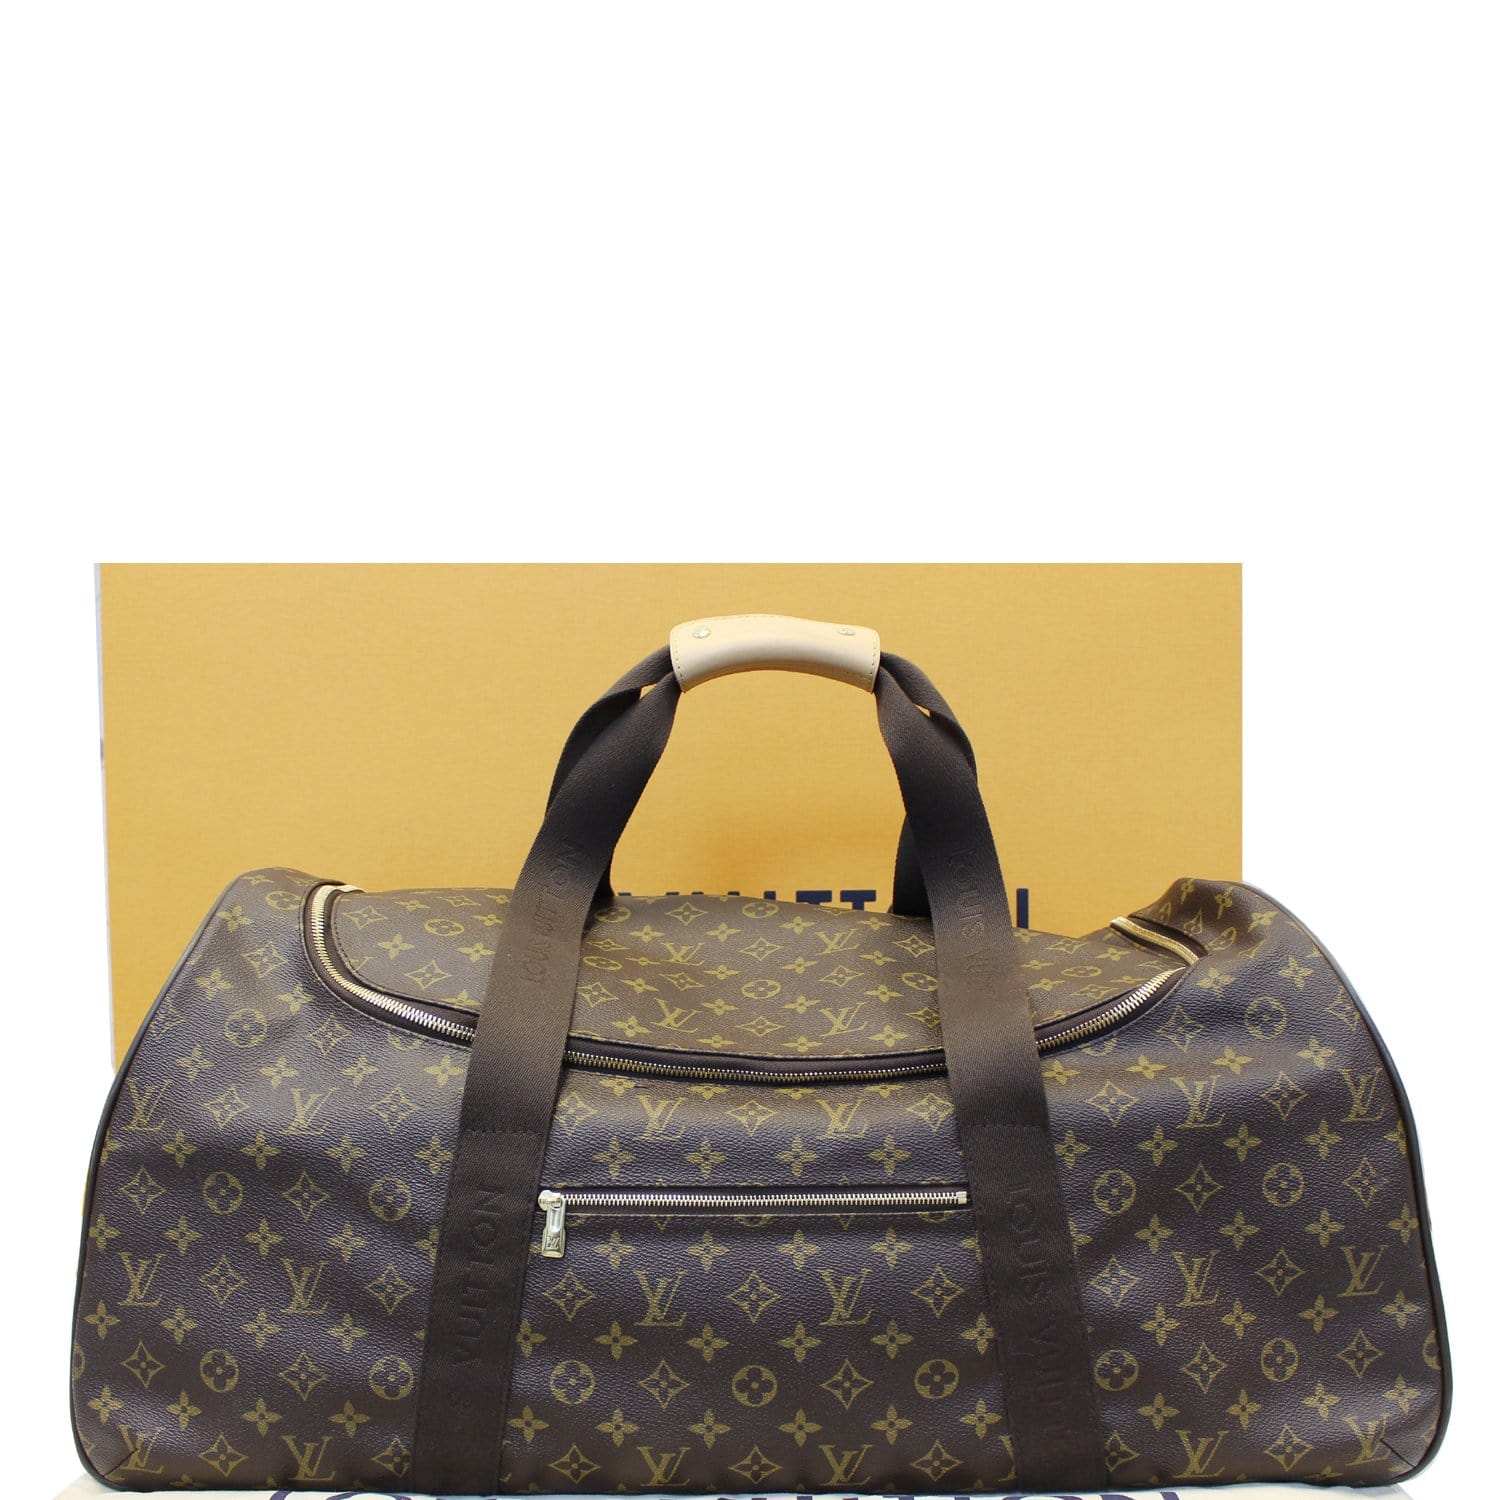 Louis Vuitton, Bags, Louis Vuitton Barely Used Duffle Roller Bag